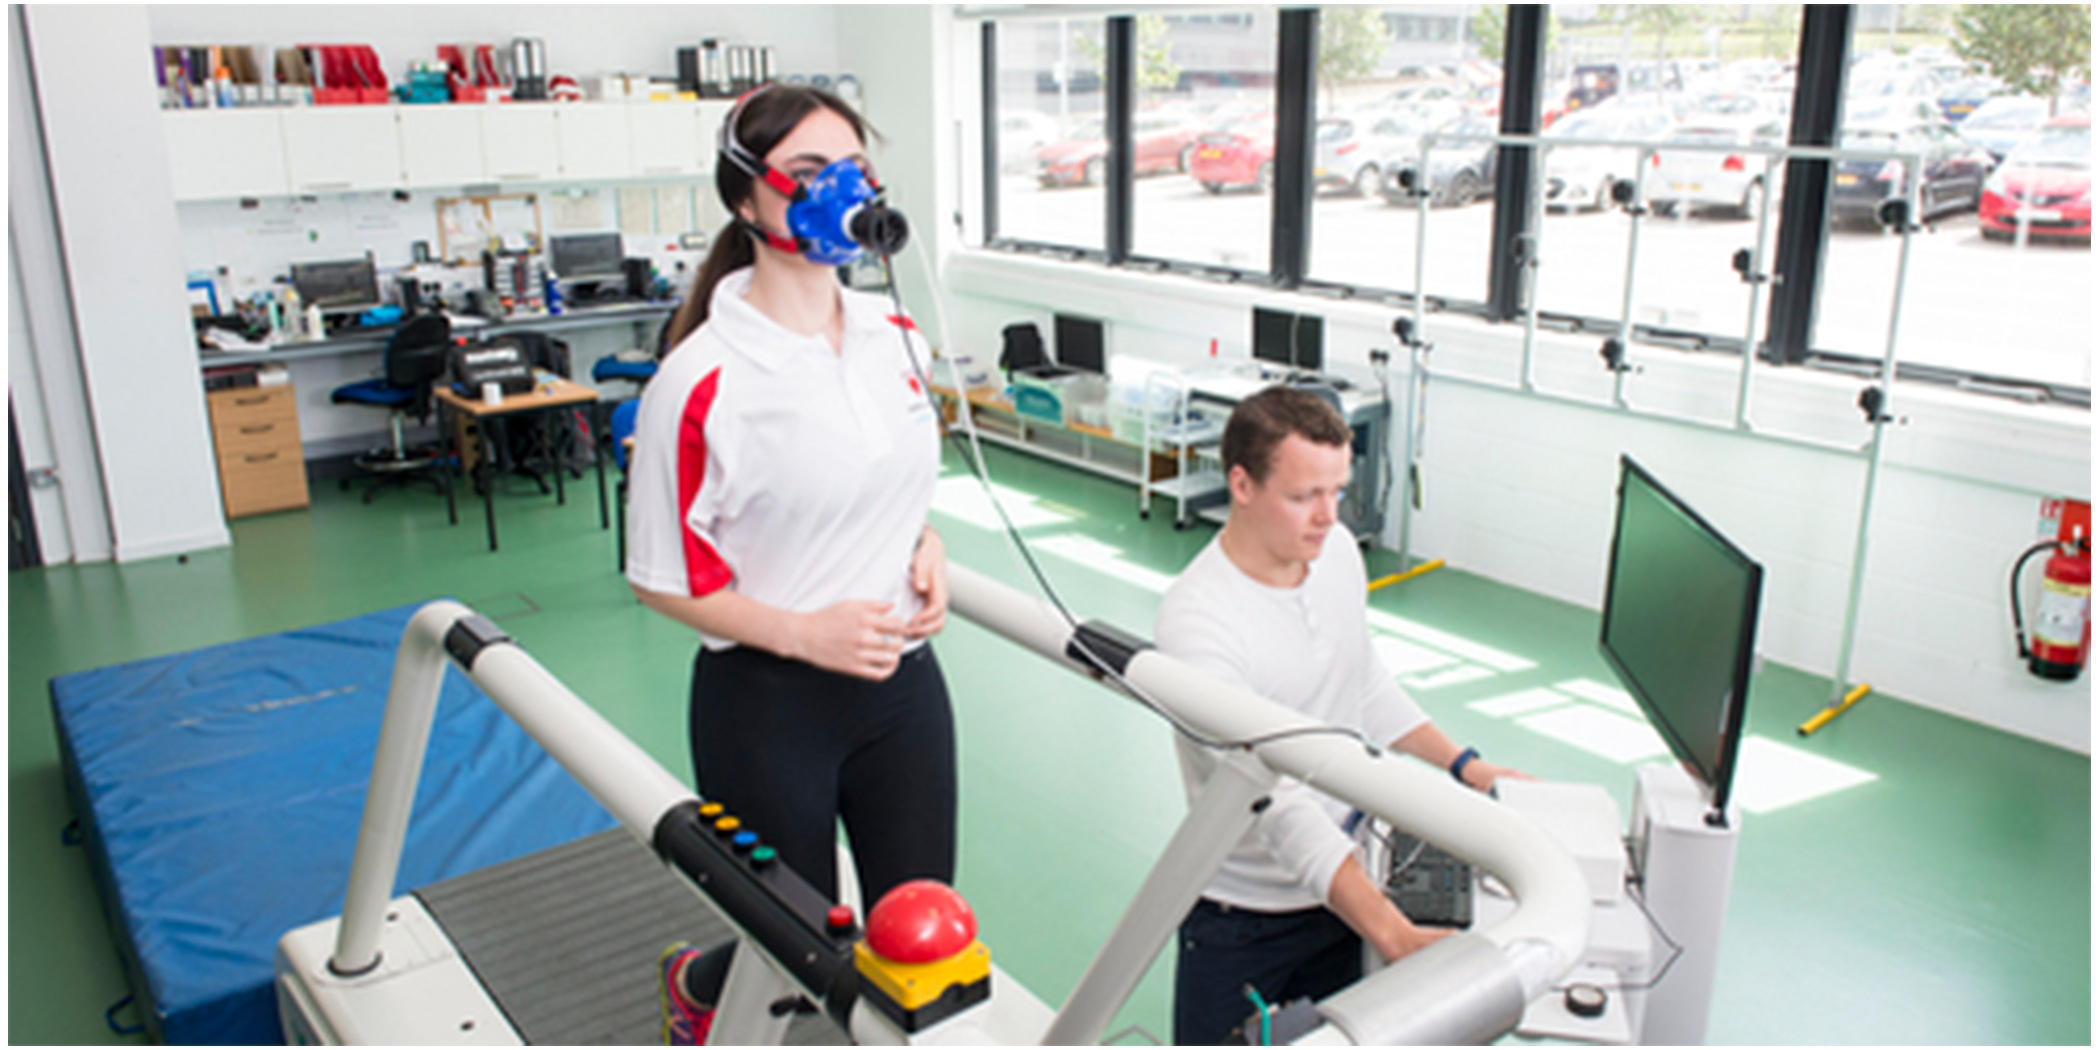 BSc (Hons) Physical Activity & Health Undergraduate Full-time